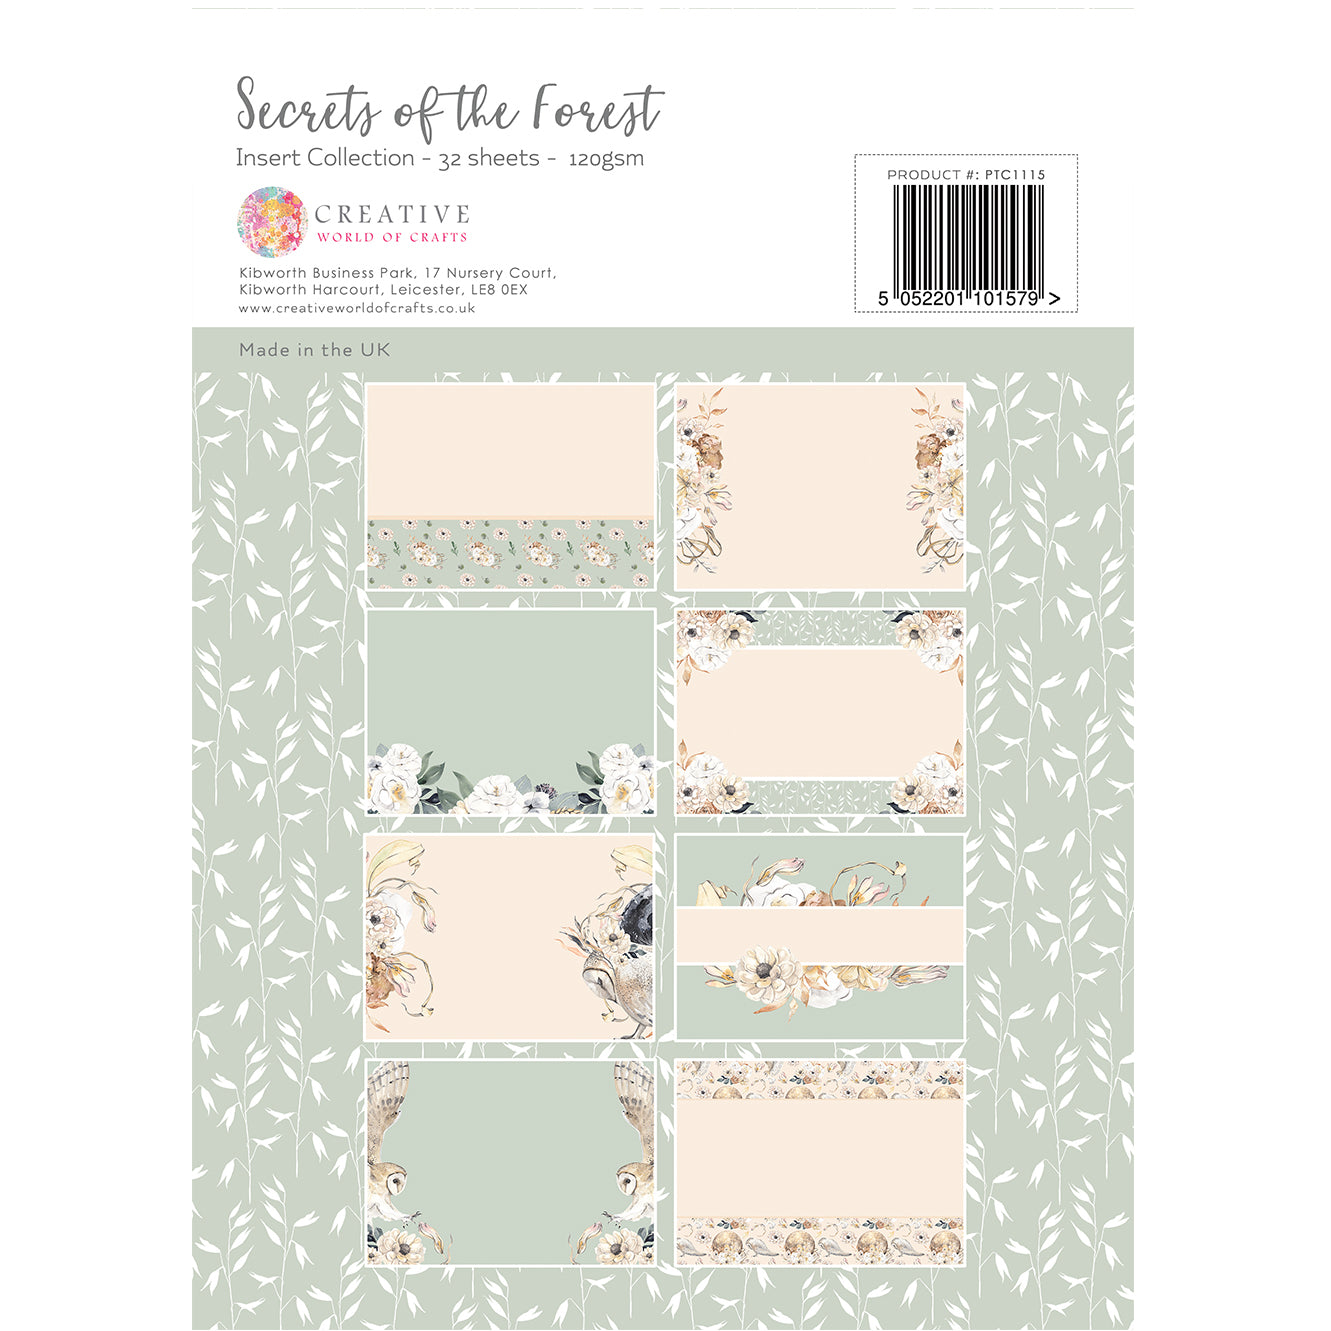 The Paper Tree Secrets of the Forest A4 Insert Collection